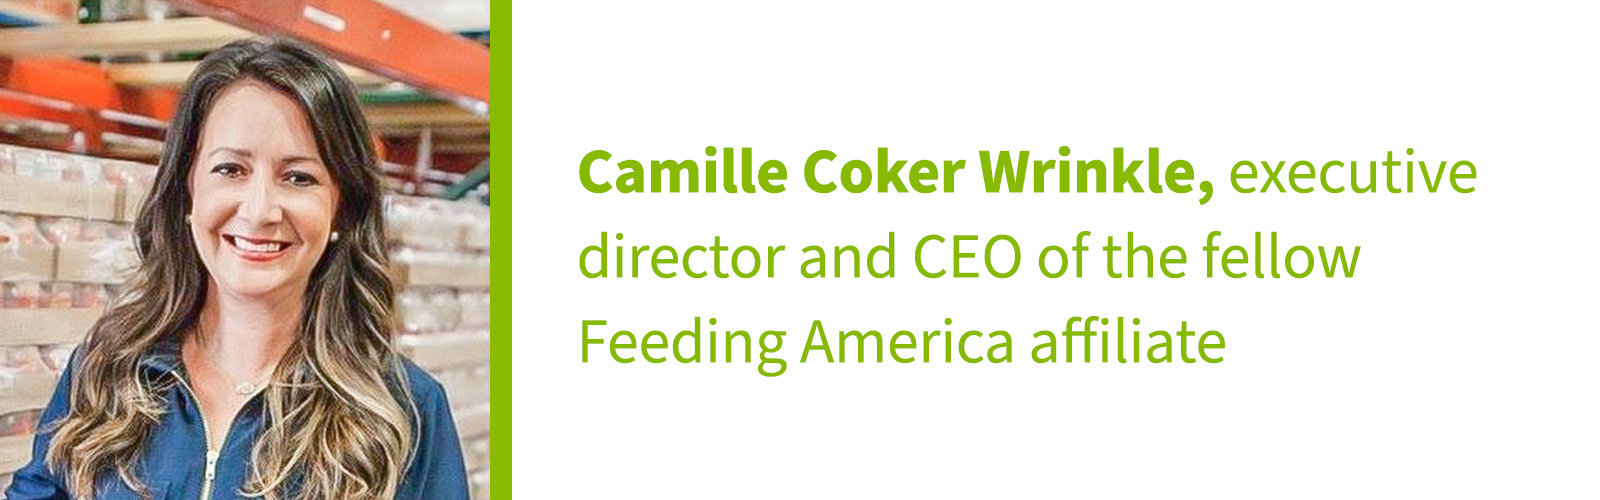 Camille Coker Wrinkle, executive director and CEO of the fellow Feeding America affiliate